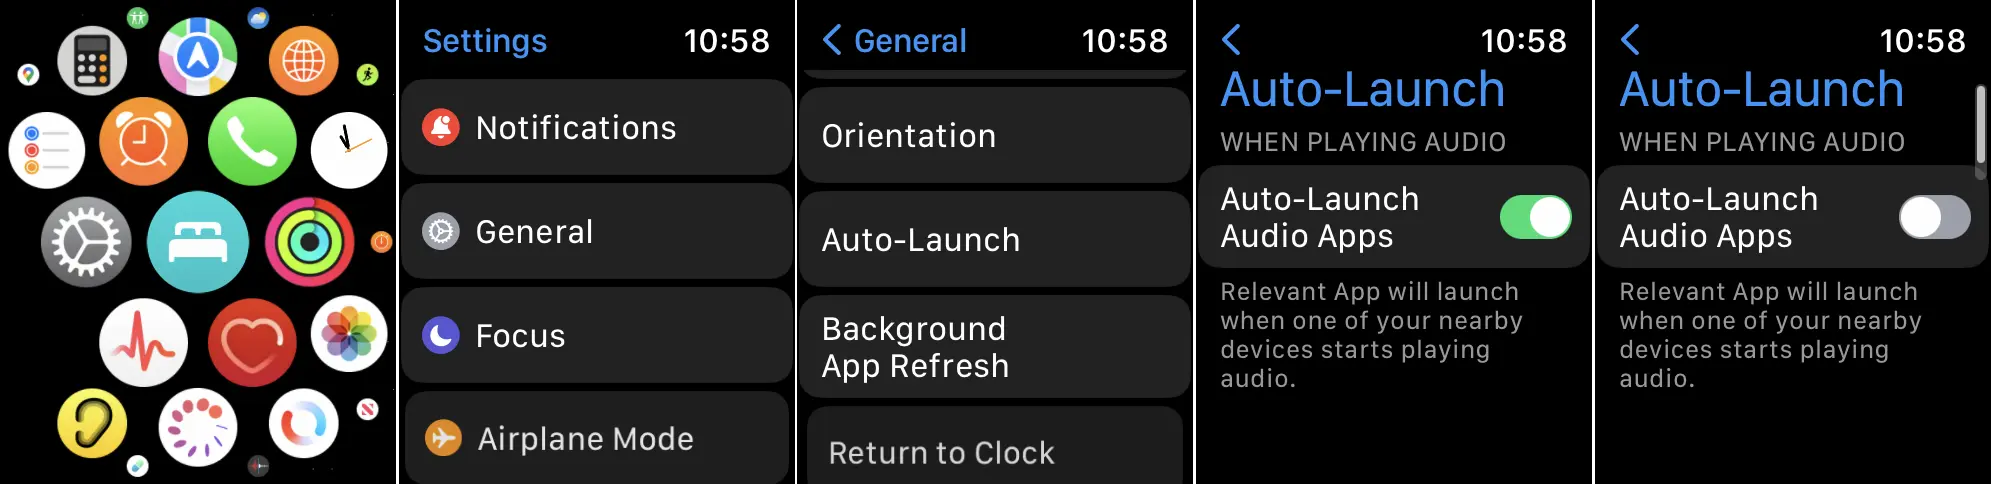 Deaktiver automatisk afspilning - Now Playing Apple Watch